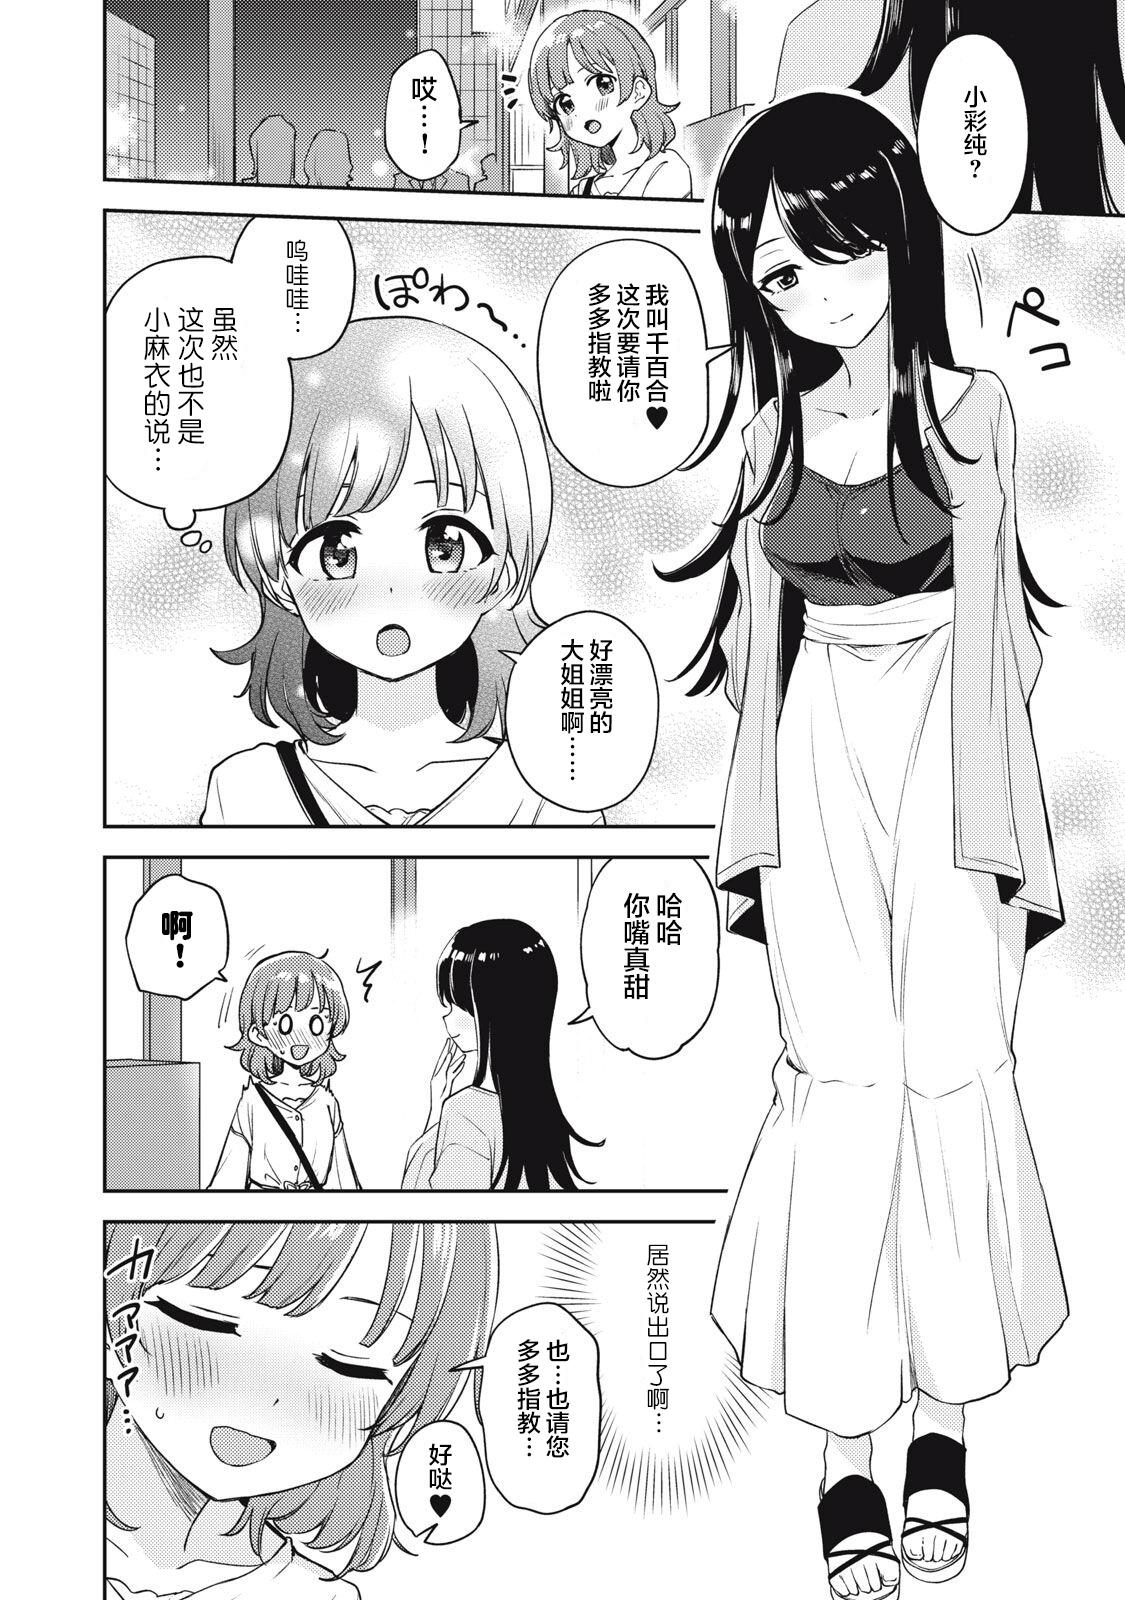 Bunduda Asumi-chan Is Interested In Lesbian Brothels! Extra Episode High Heels - Page 2